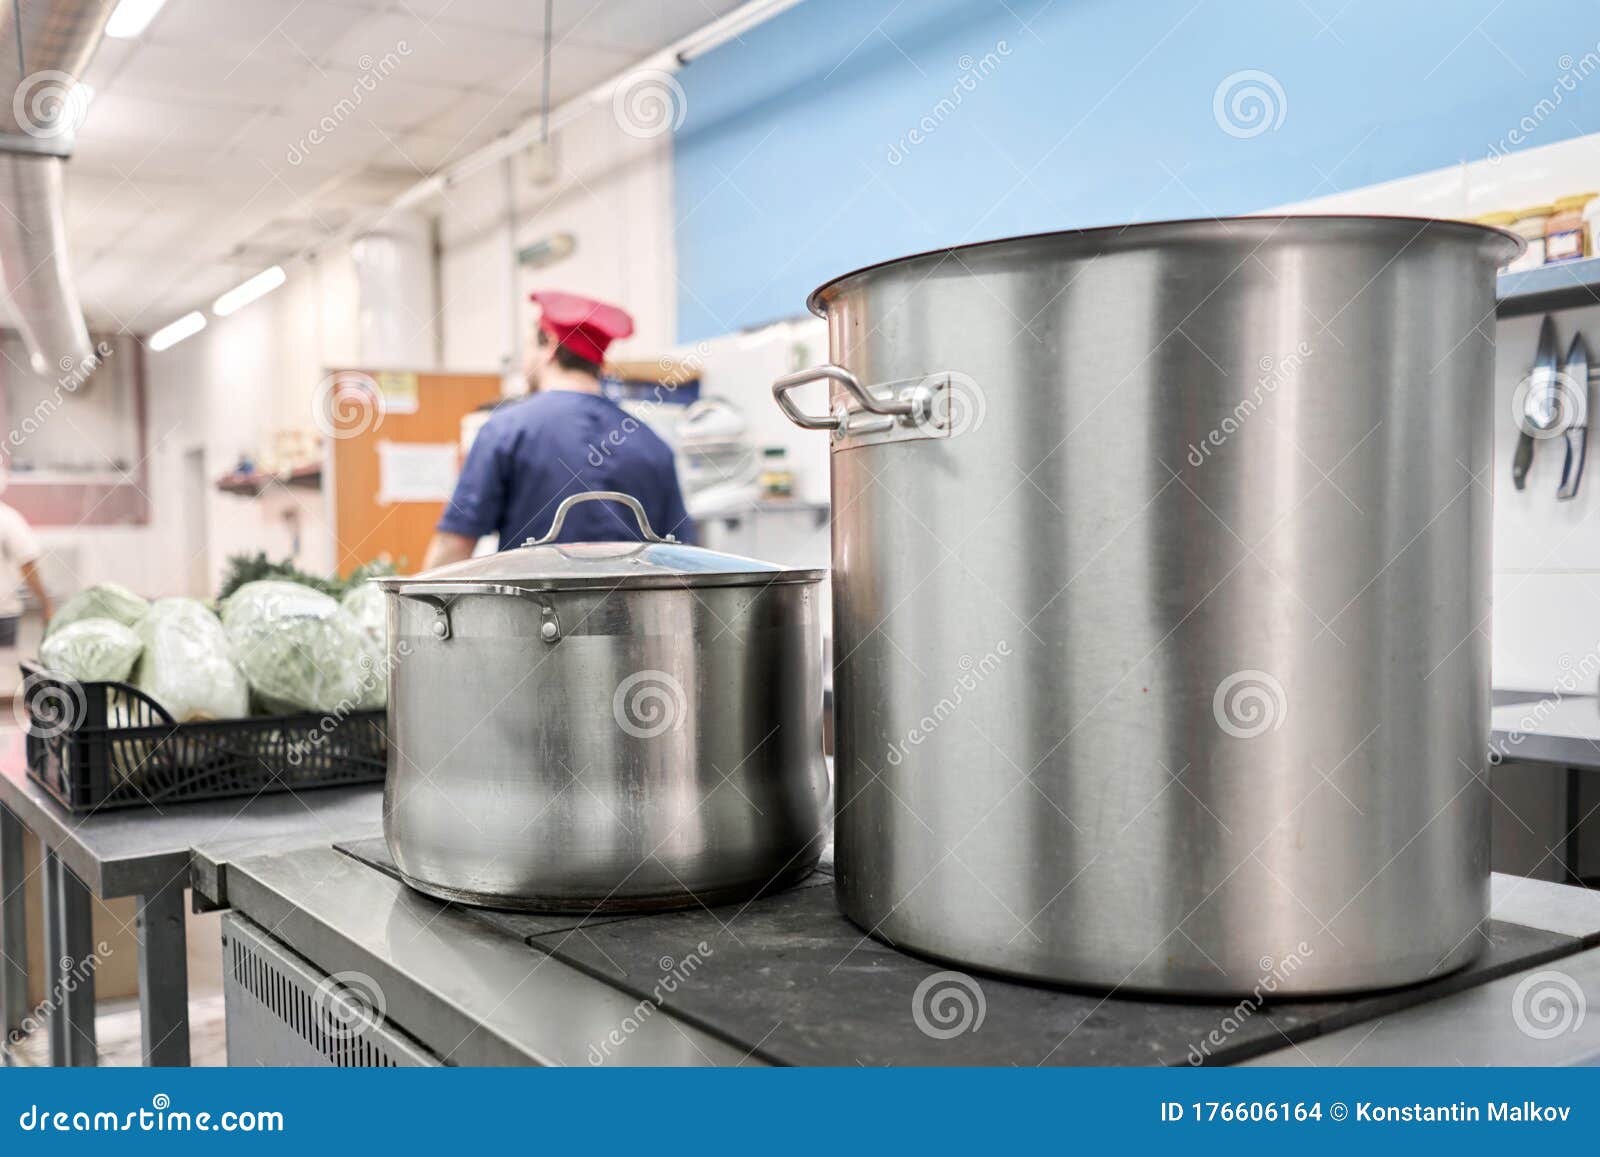 https://thumbs.dreamstime.com/z/closeup-large-pots-stove-chef-cooking-commercial-kitchen-hot-job-real-dirty-restaurant-176606164.jpg